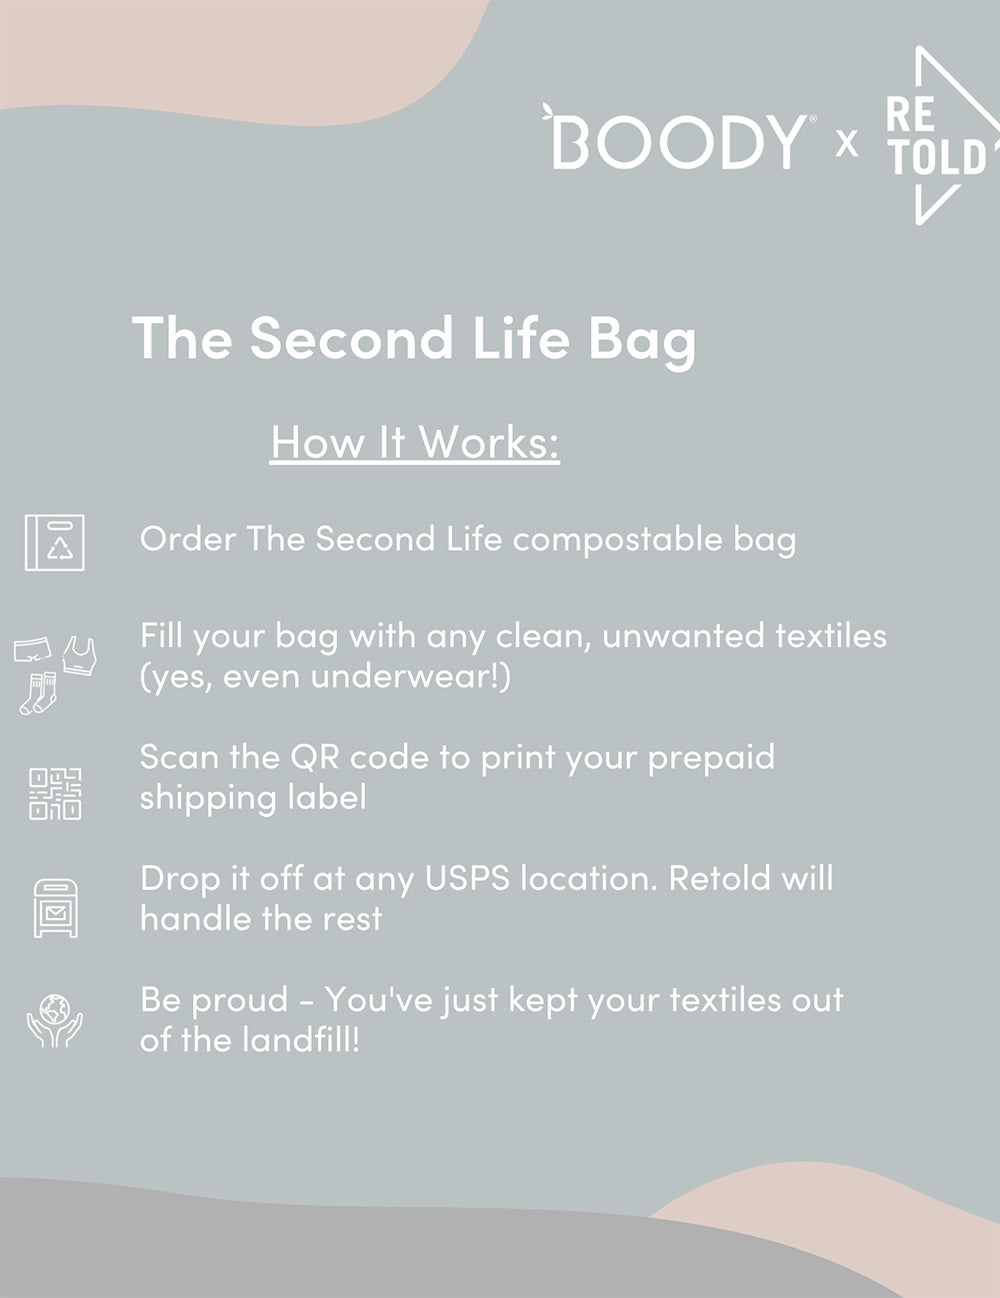 The Second Life Bag  Keep old clothes out of the landfill